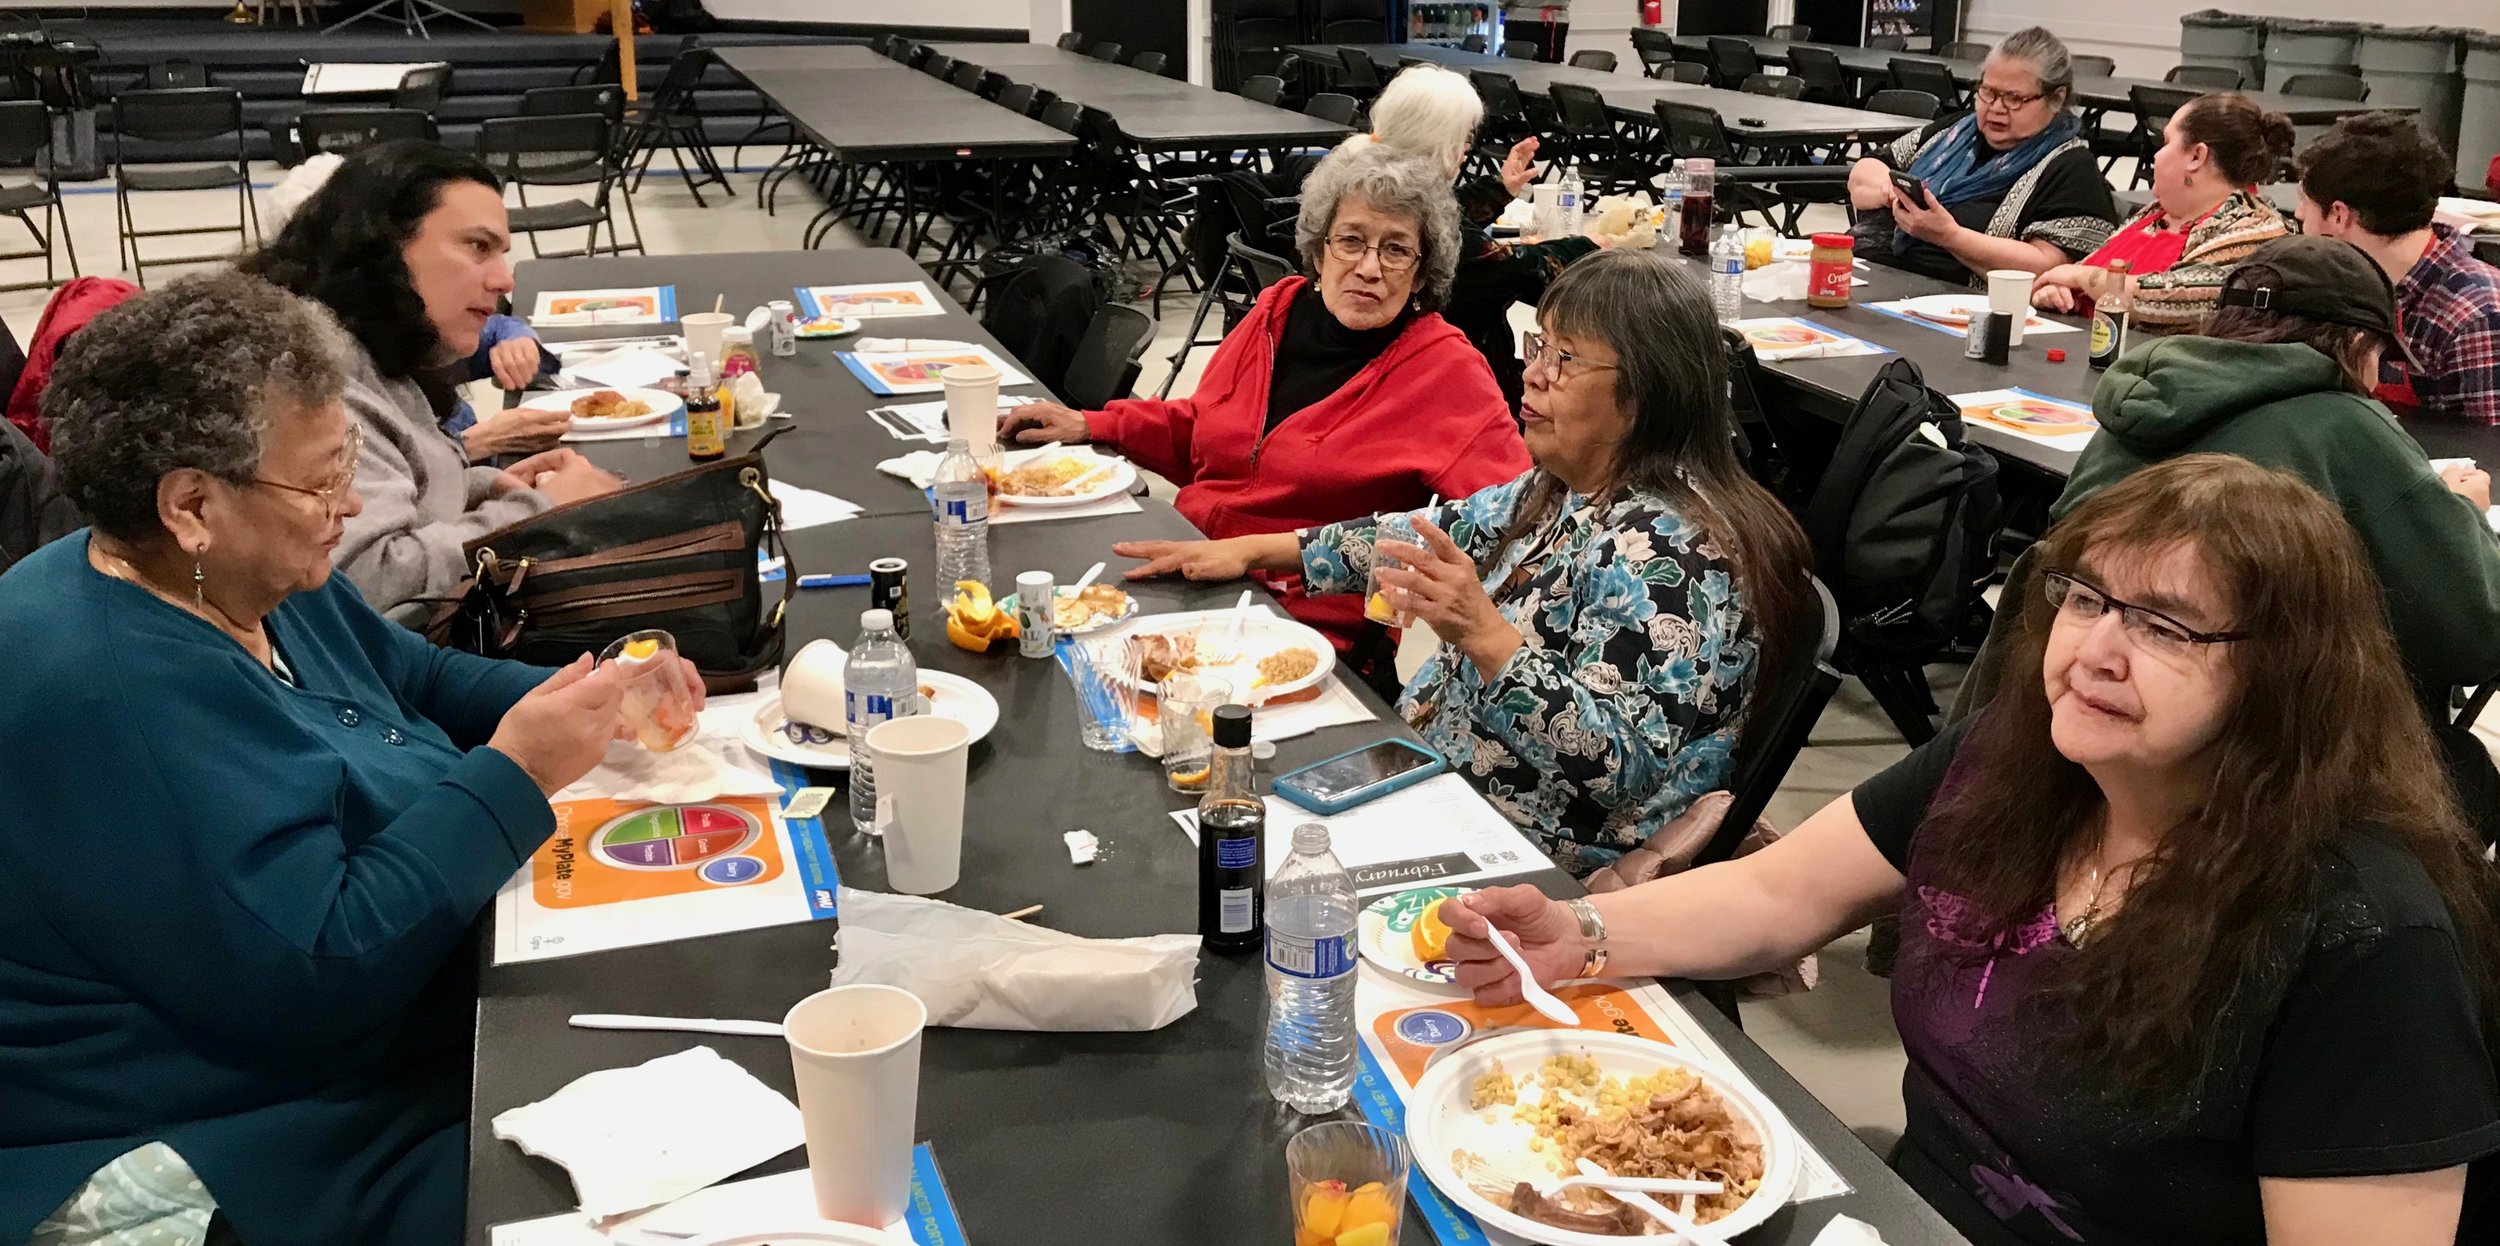 Elder's Lunch at Central Council Community Center, February 2018